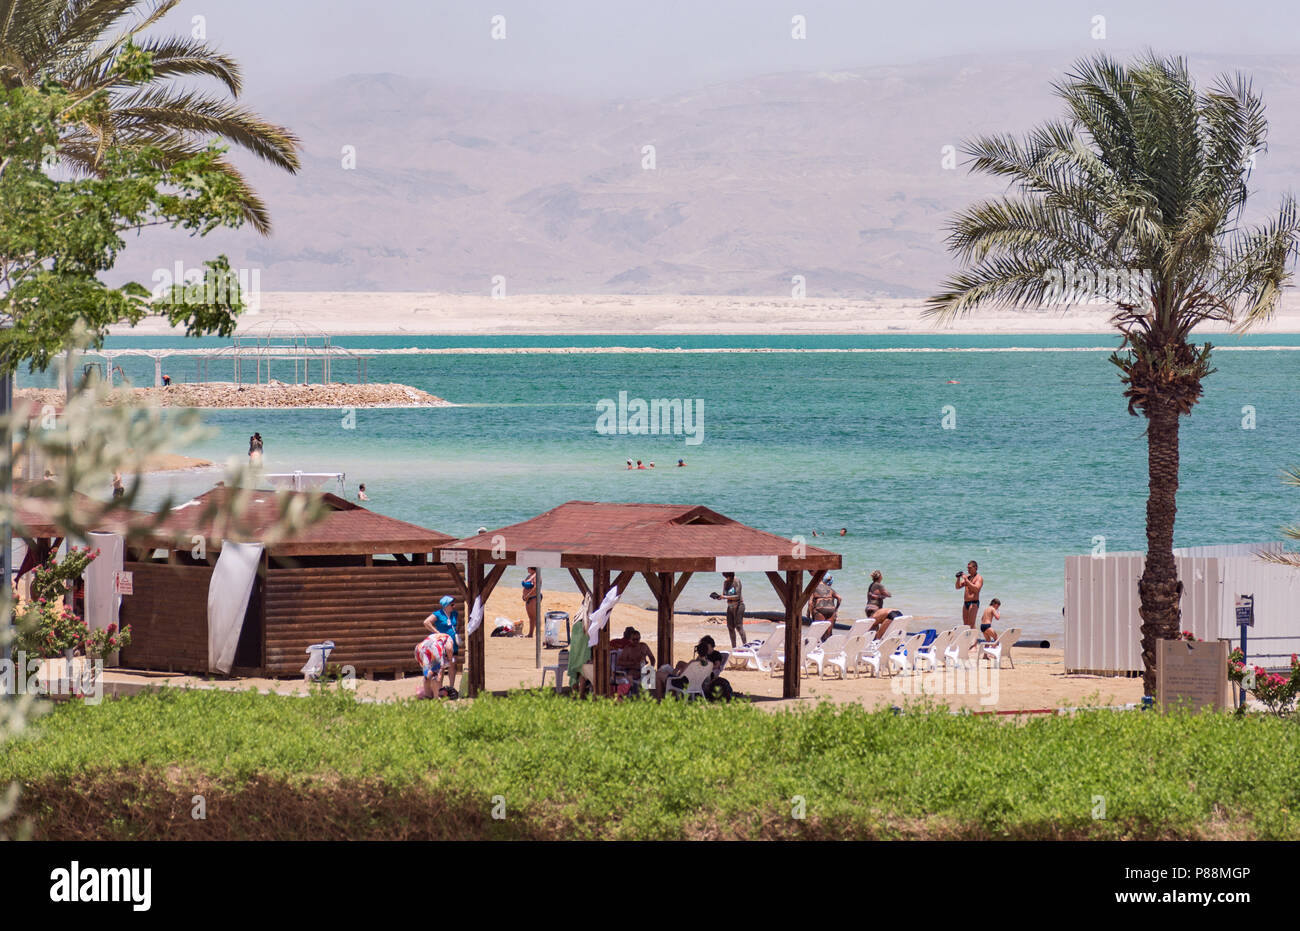 bathers and tourists enjoying a beach at Ein Bokek on the Dead Sea in Israel with Jordanian mountains in the background Stock Photo